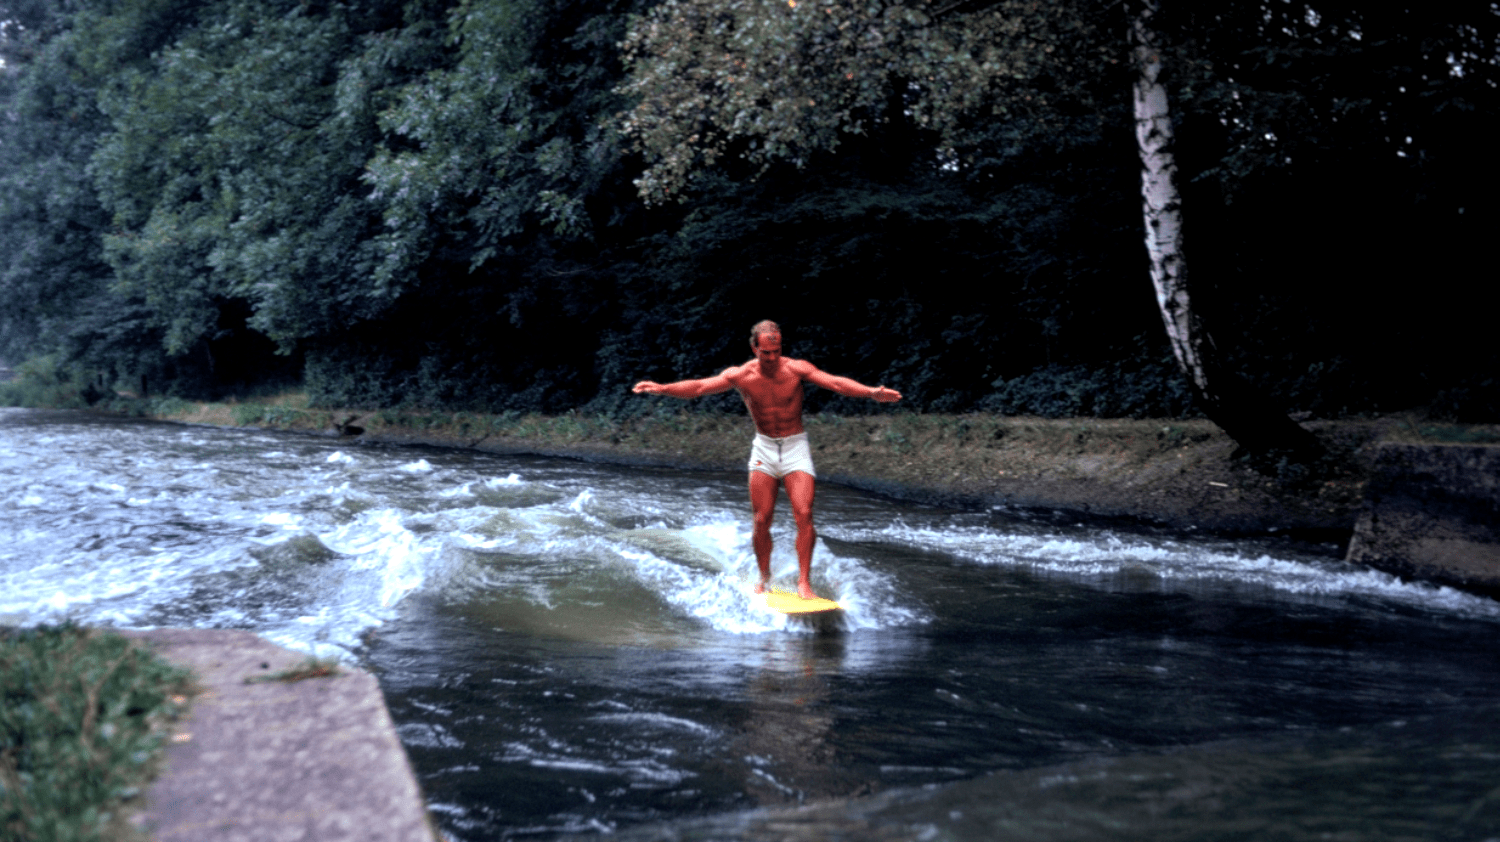 the first-ever photo taken of a surfer riding a rapid in Munich